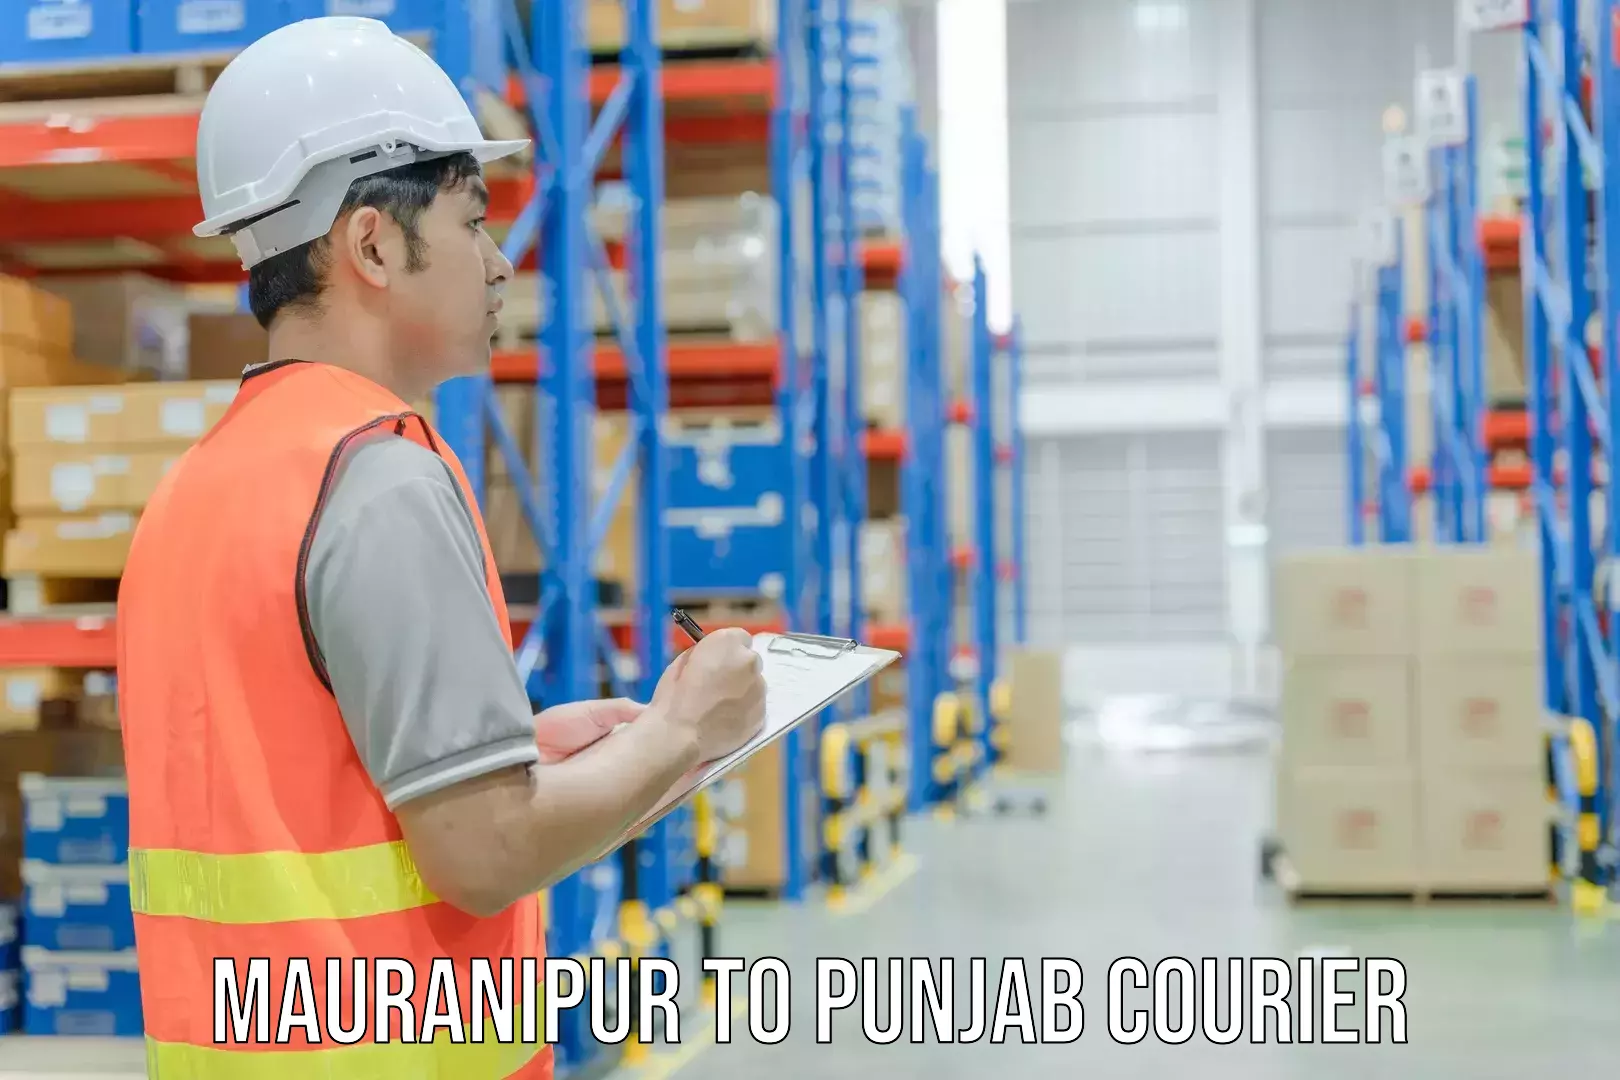 Supply chain delivery Mauranipur to Punjab